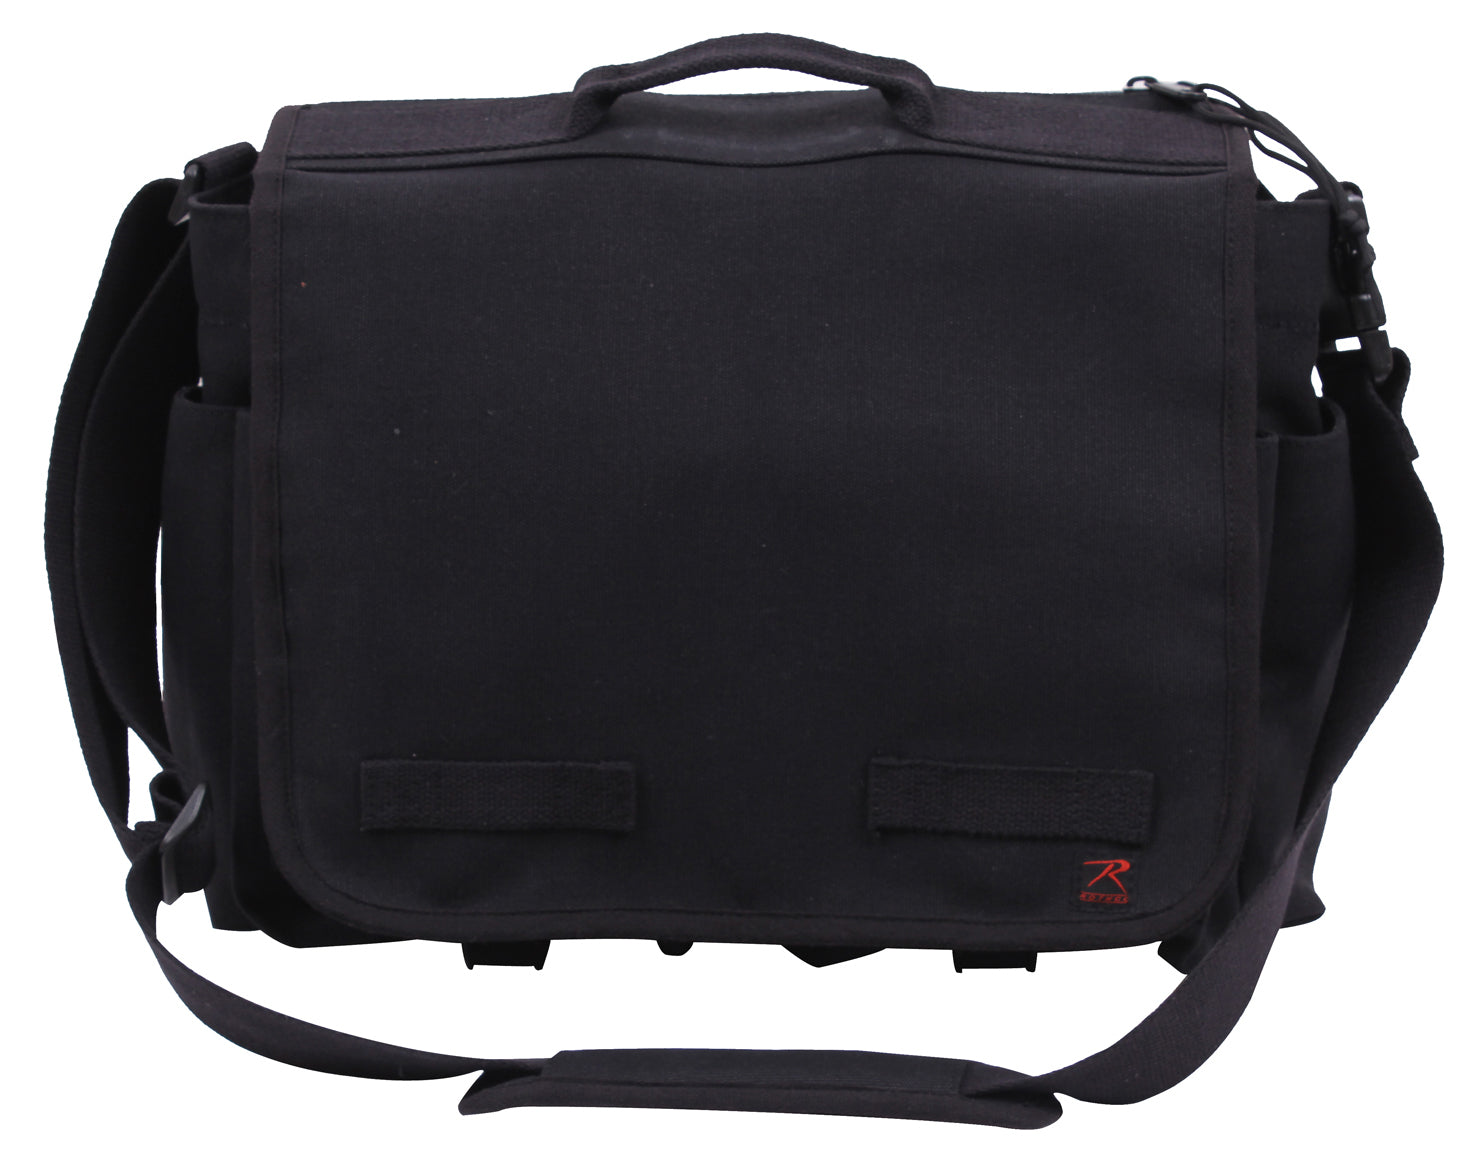 Rothco Concealed Carry Messenger Bag